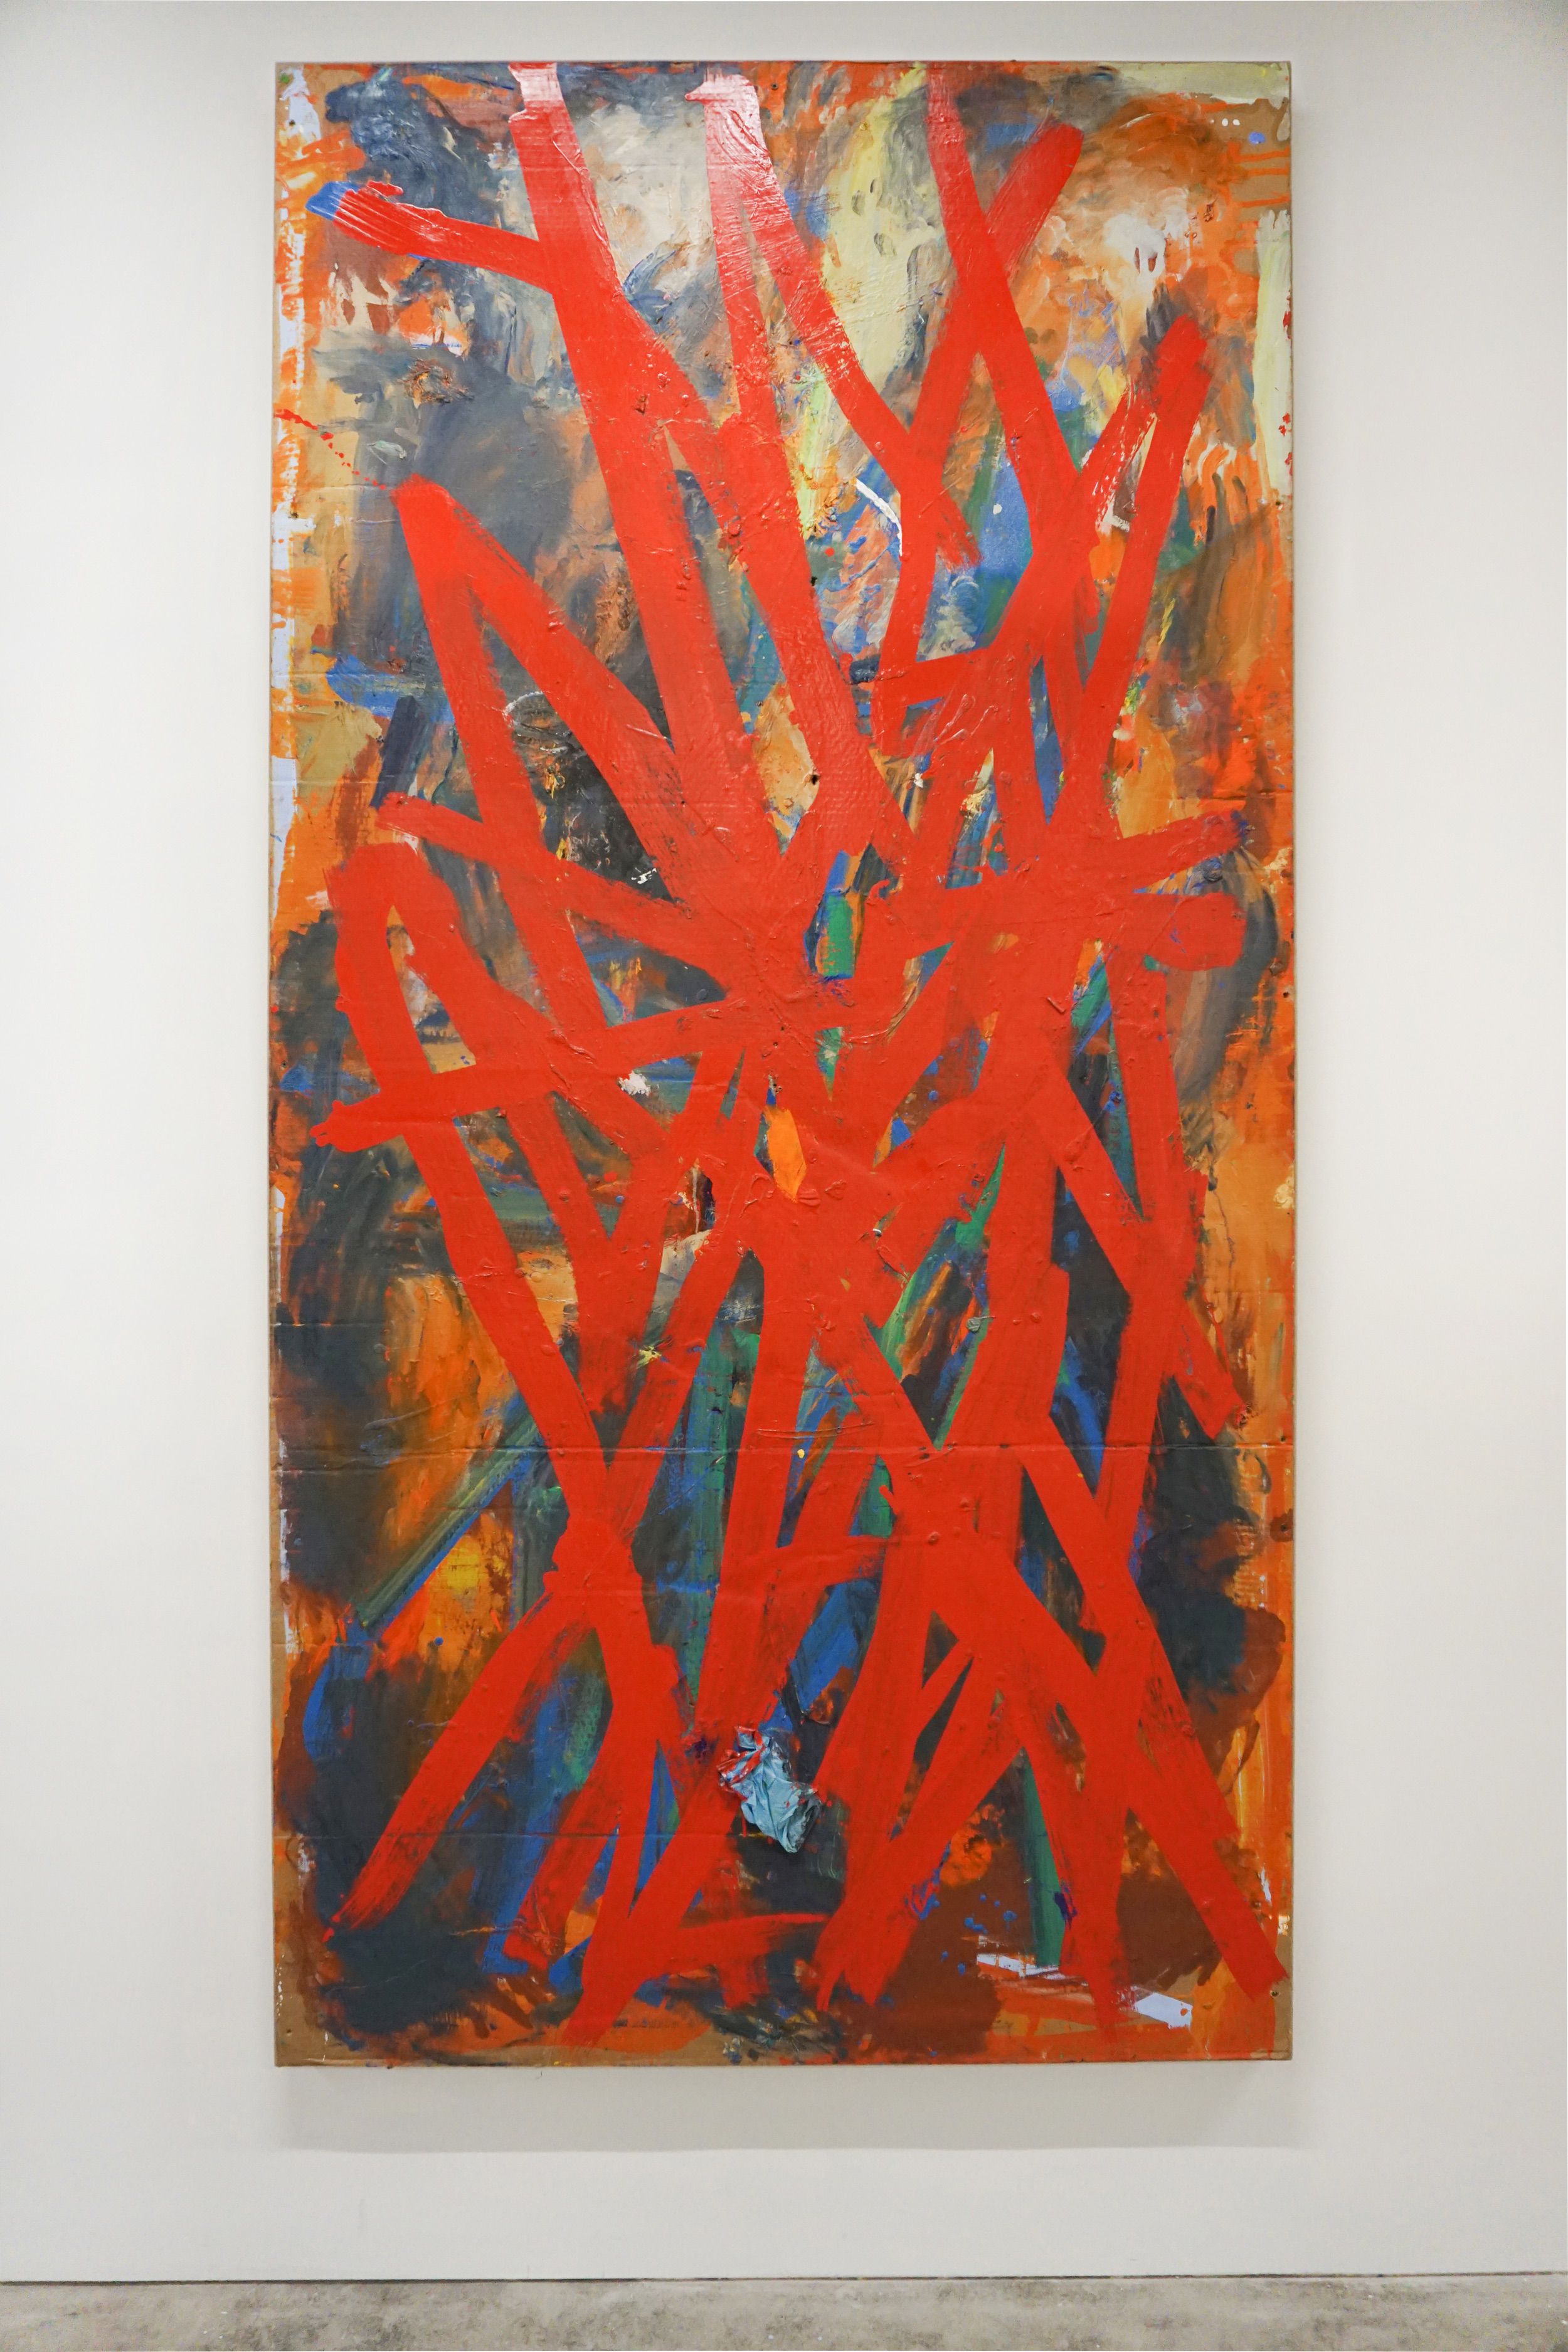  Spencer Lewis  Red Slash , 2016 Mixed media 96 x 48 inches 